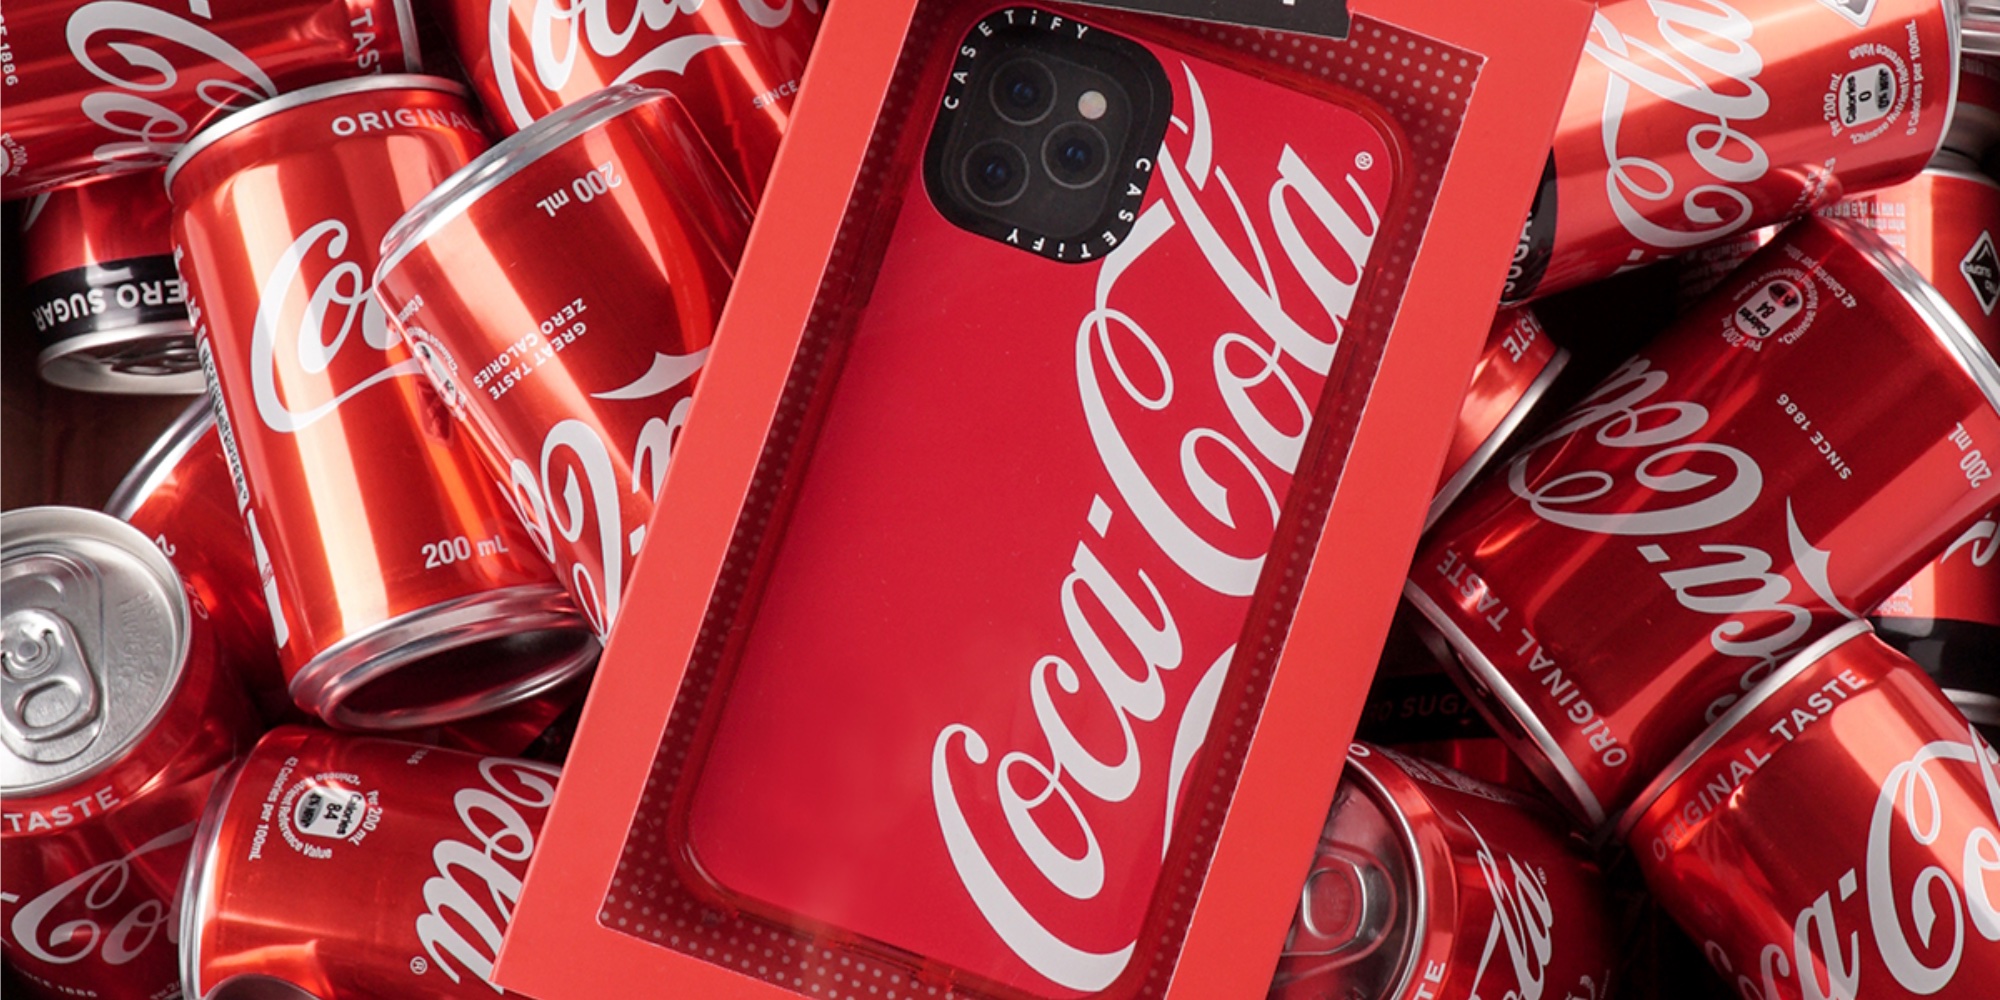 Coca-Cola iPhone case collection from CASETiFY debuts, more - 9to5Toys